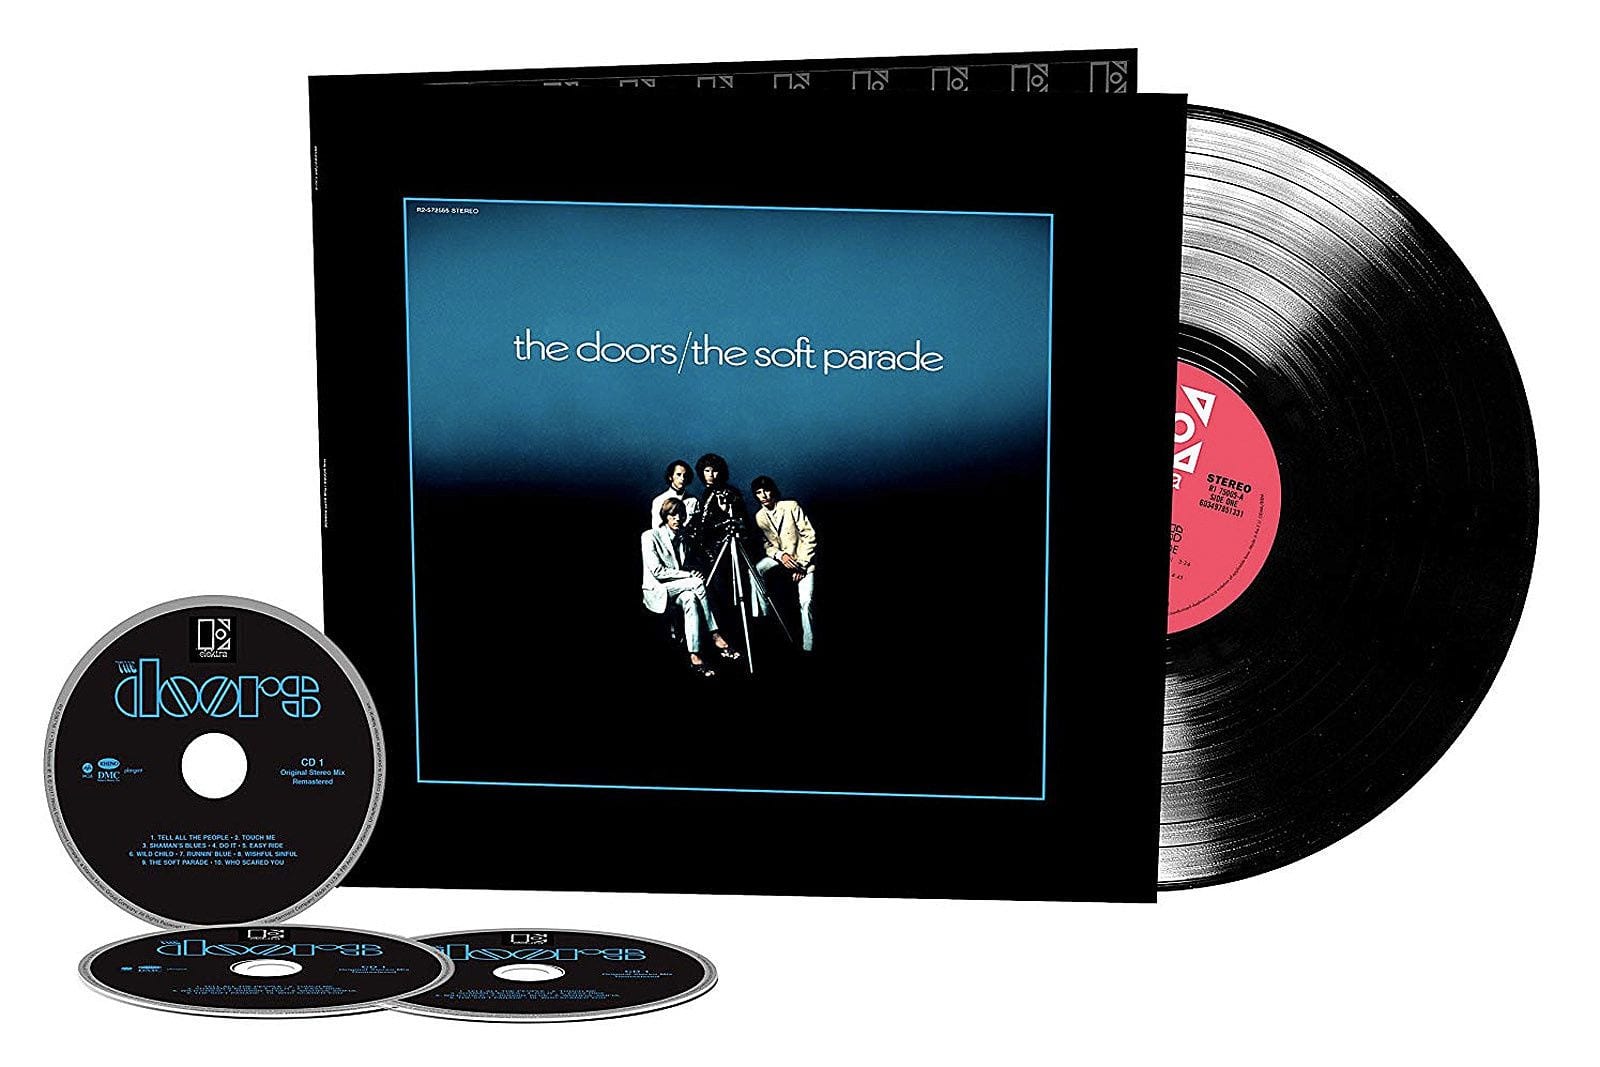 The Doors’ ‘Soft Parade’ Gets the Deluxe Edition Treatment and a Chance for Reassessment